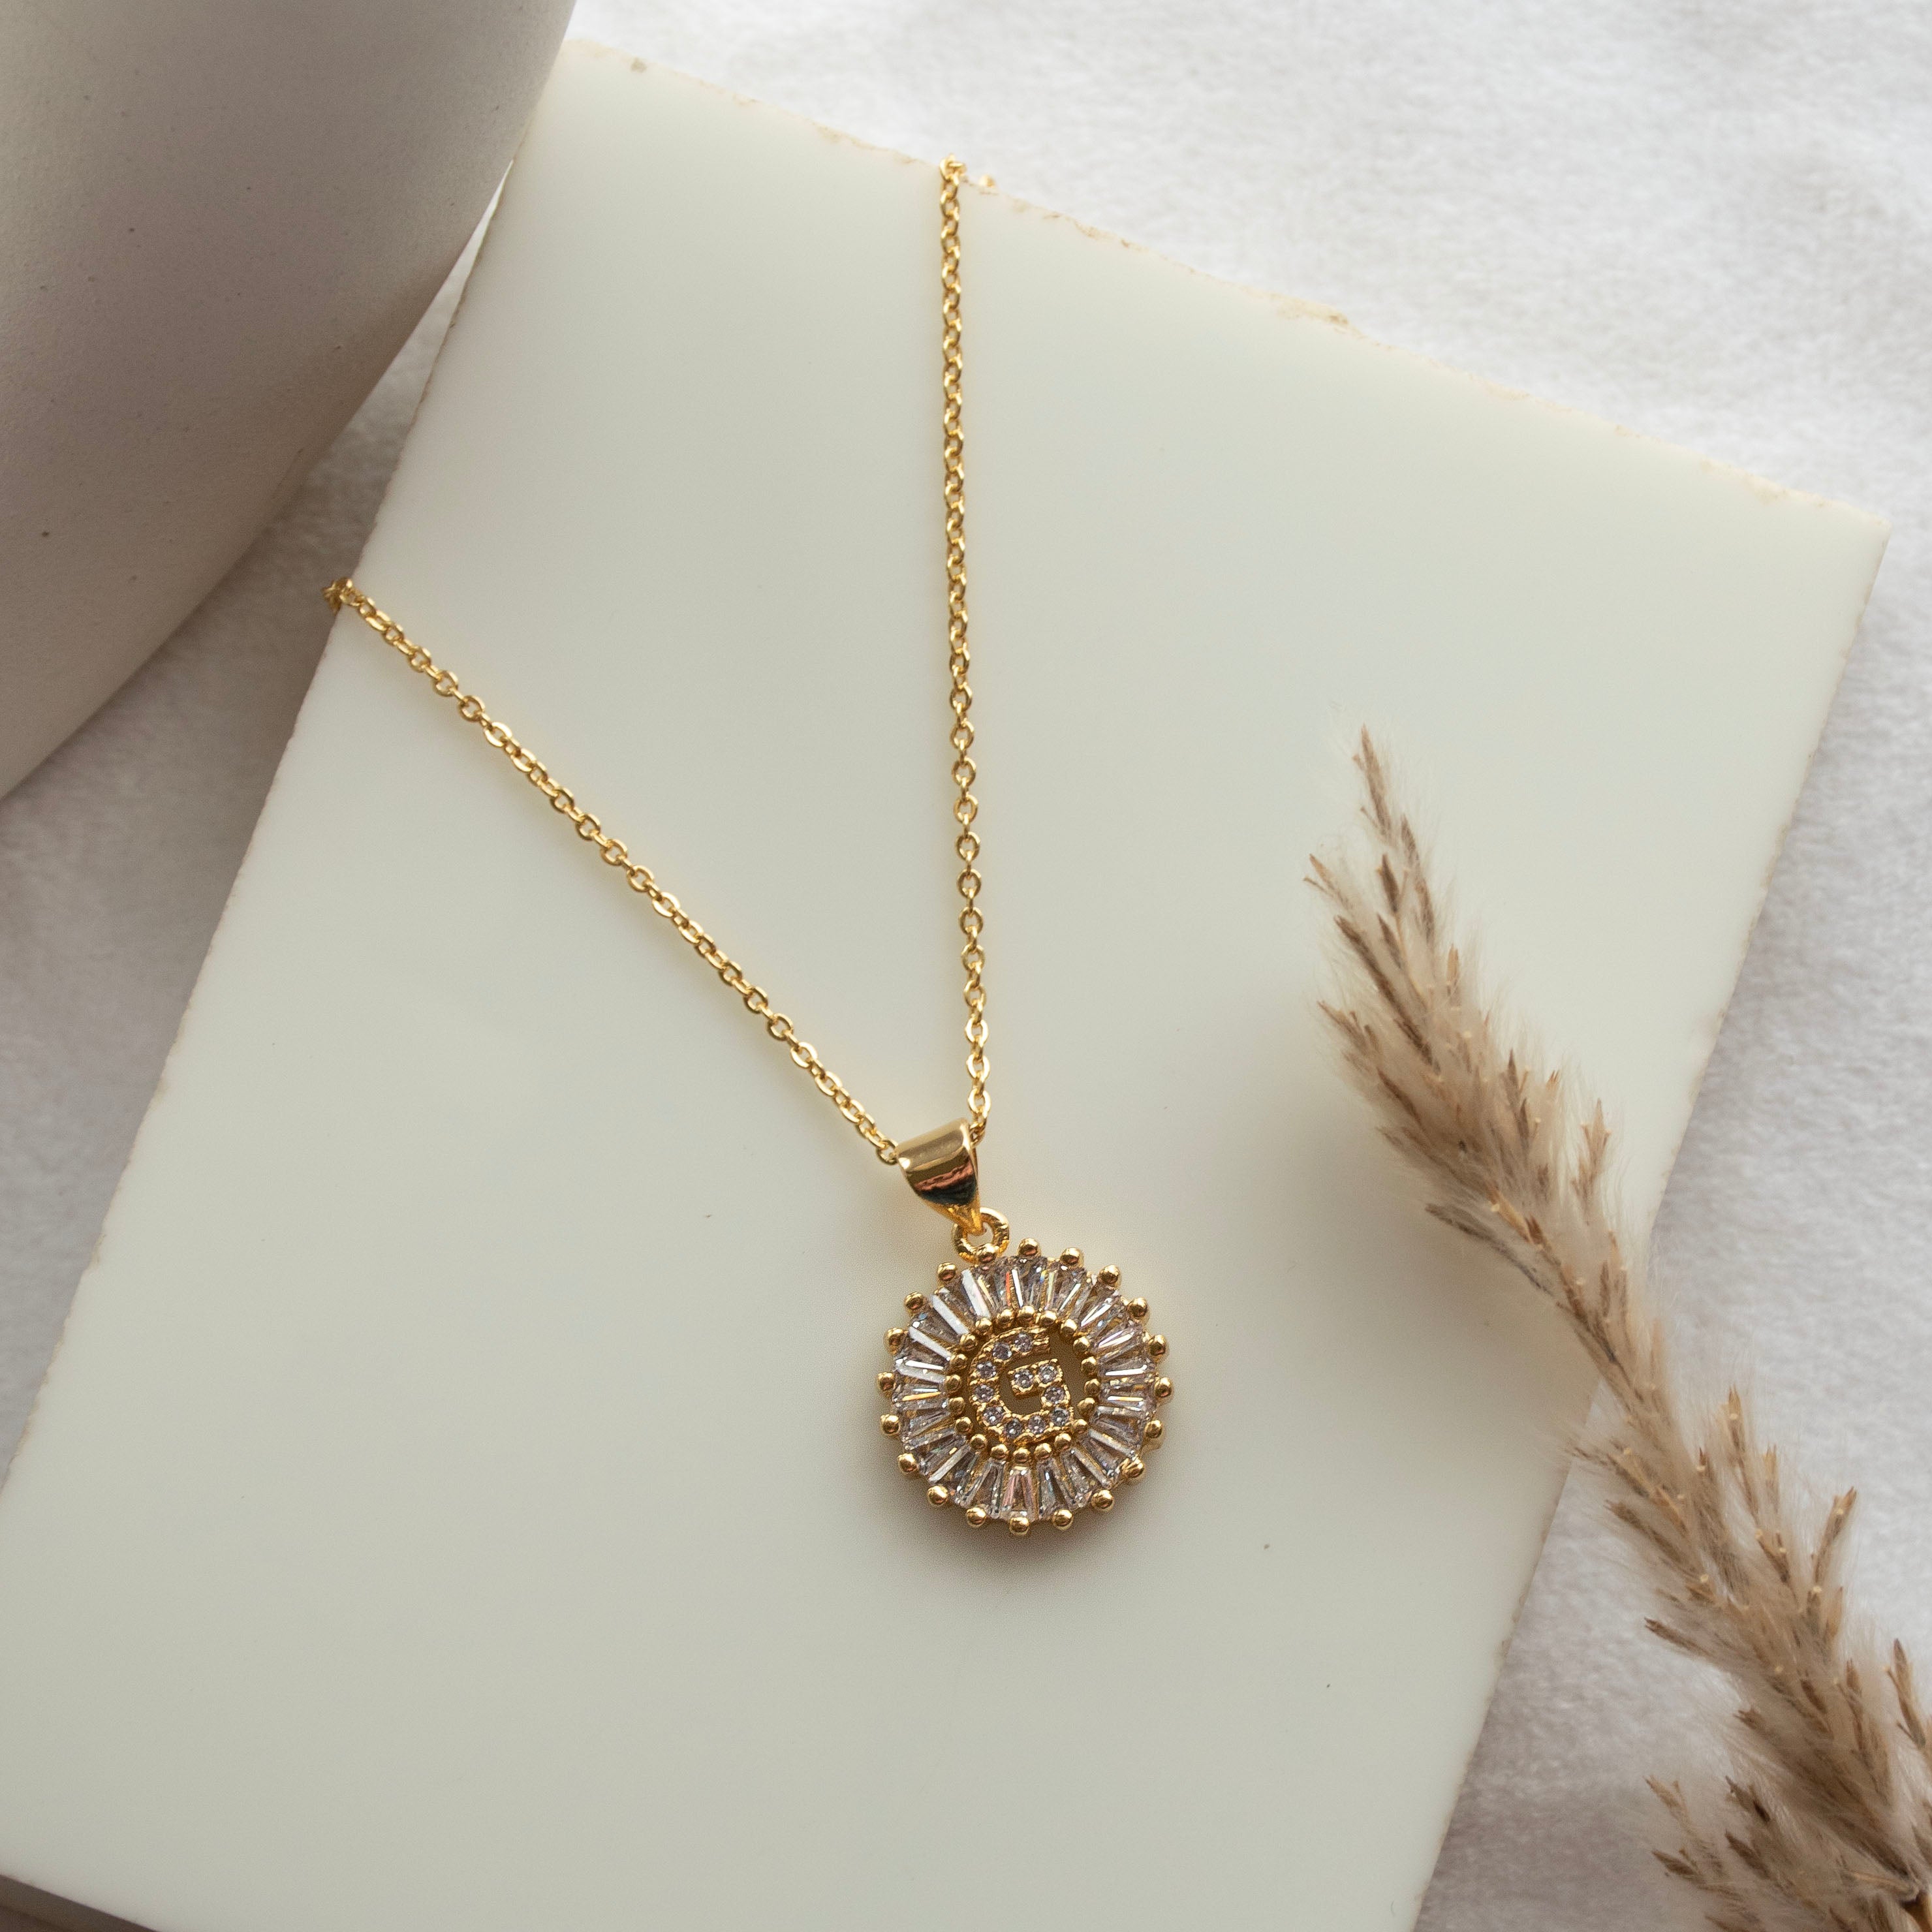 The Personalised Initial Necklace